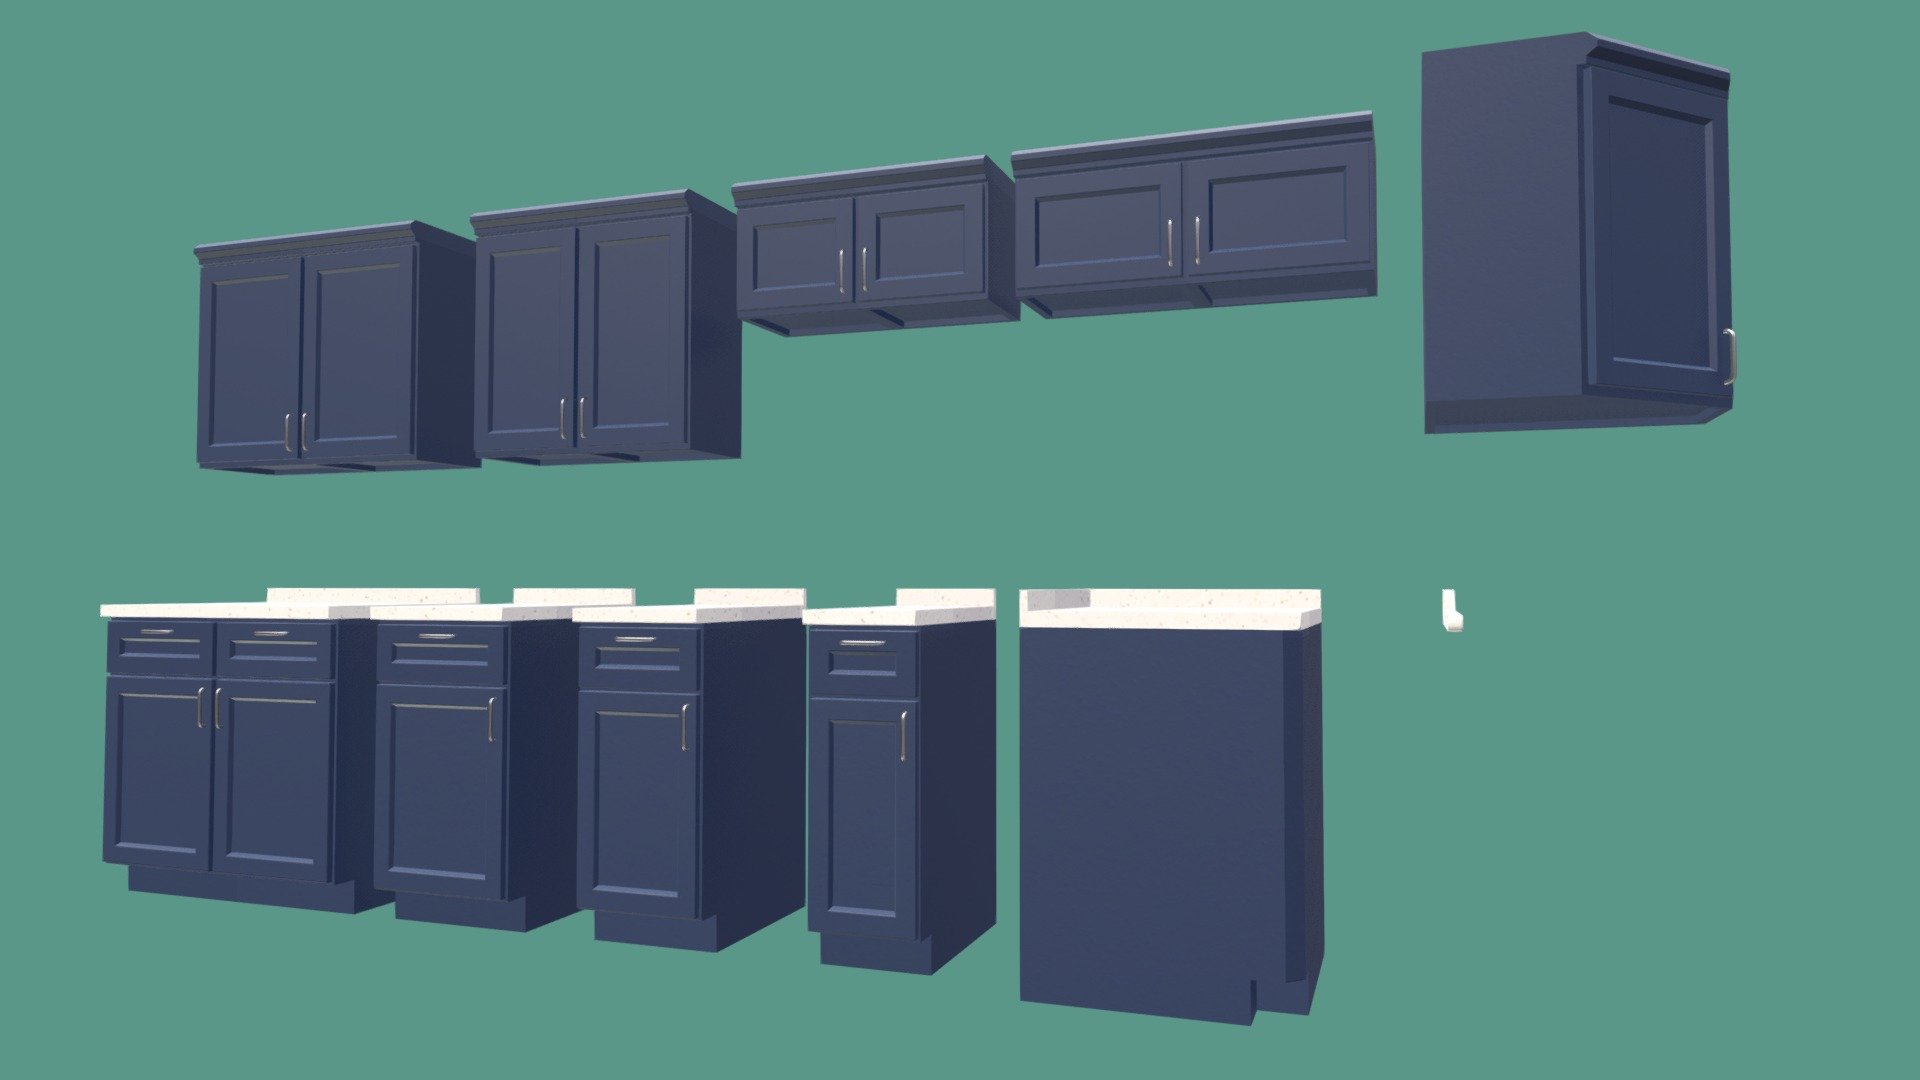 Accurate to life scale kitchen cabinet set. Includes multiple accurate sizes, corner pieces, countertop end cap. It is reccommended to redo the UVs for the countertops once they are in place if using a different texture than the included one to avoid seams. Includes Blender file and FBX 3d model